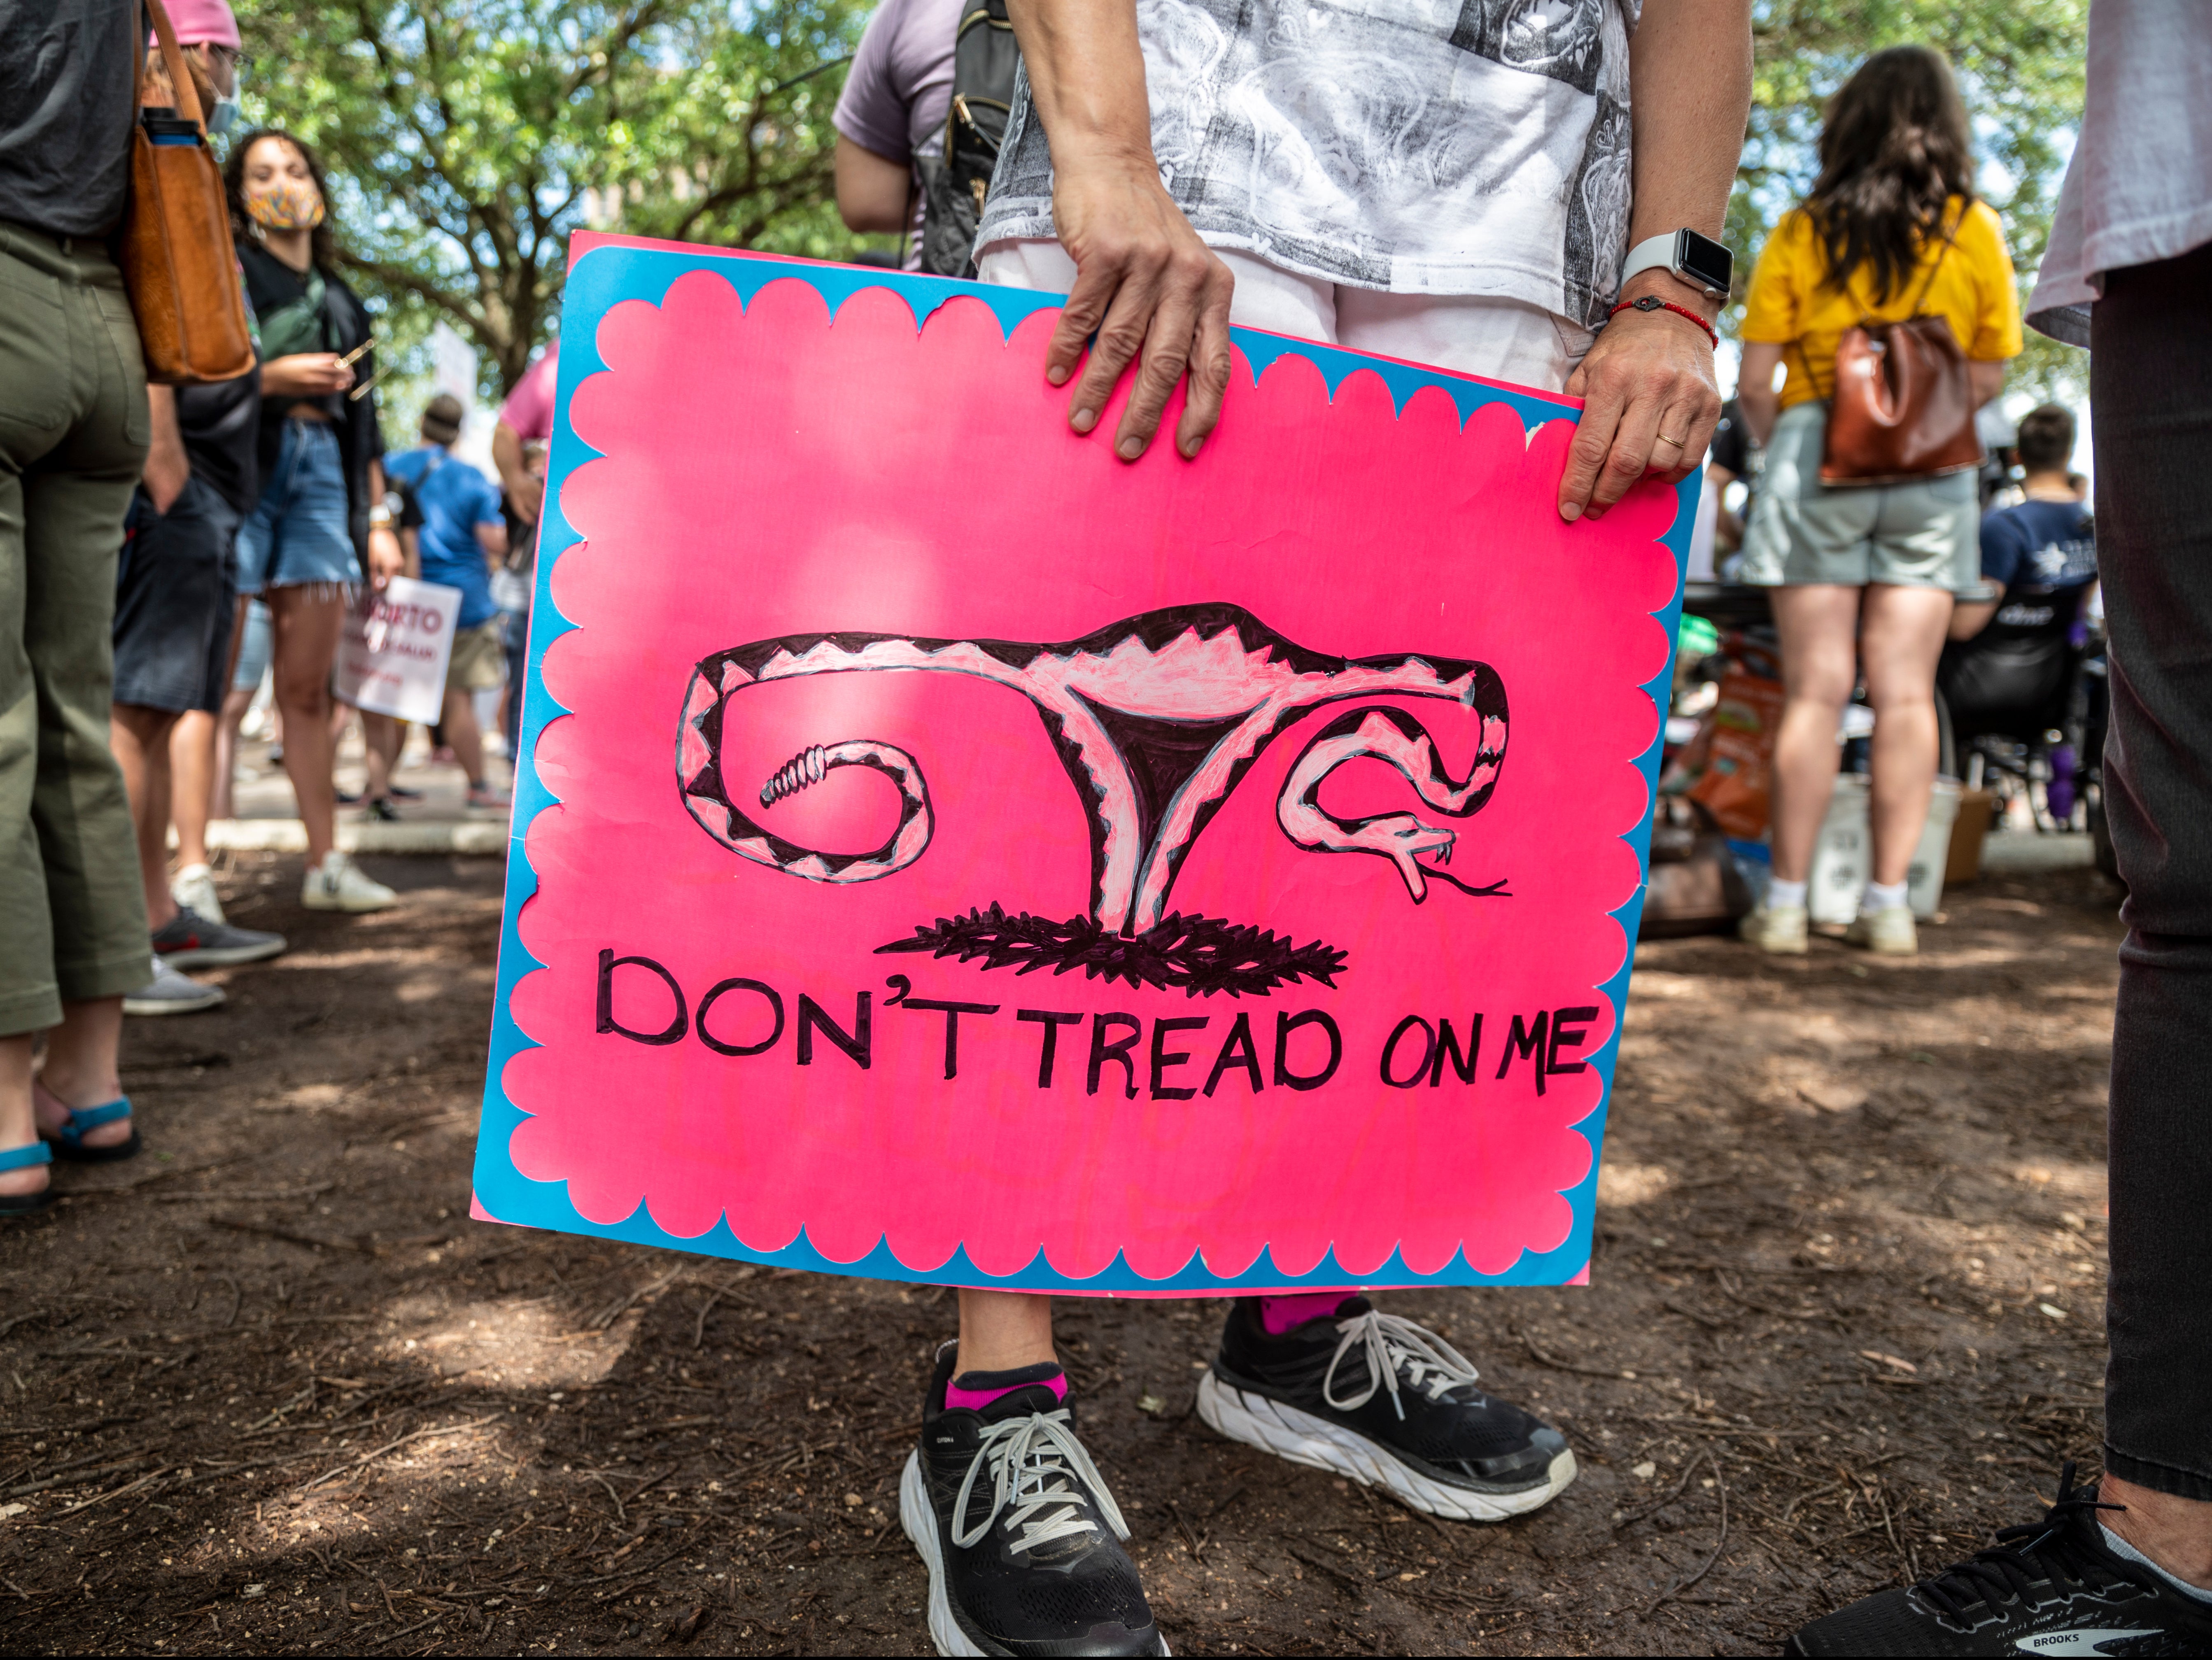 A protester holds a sign before a protest outside the Texas state capitol on 29 May 2021 in Austin, Texas